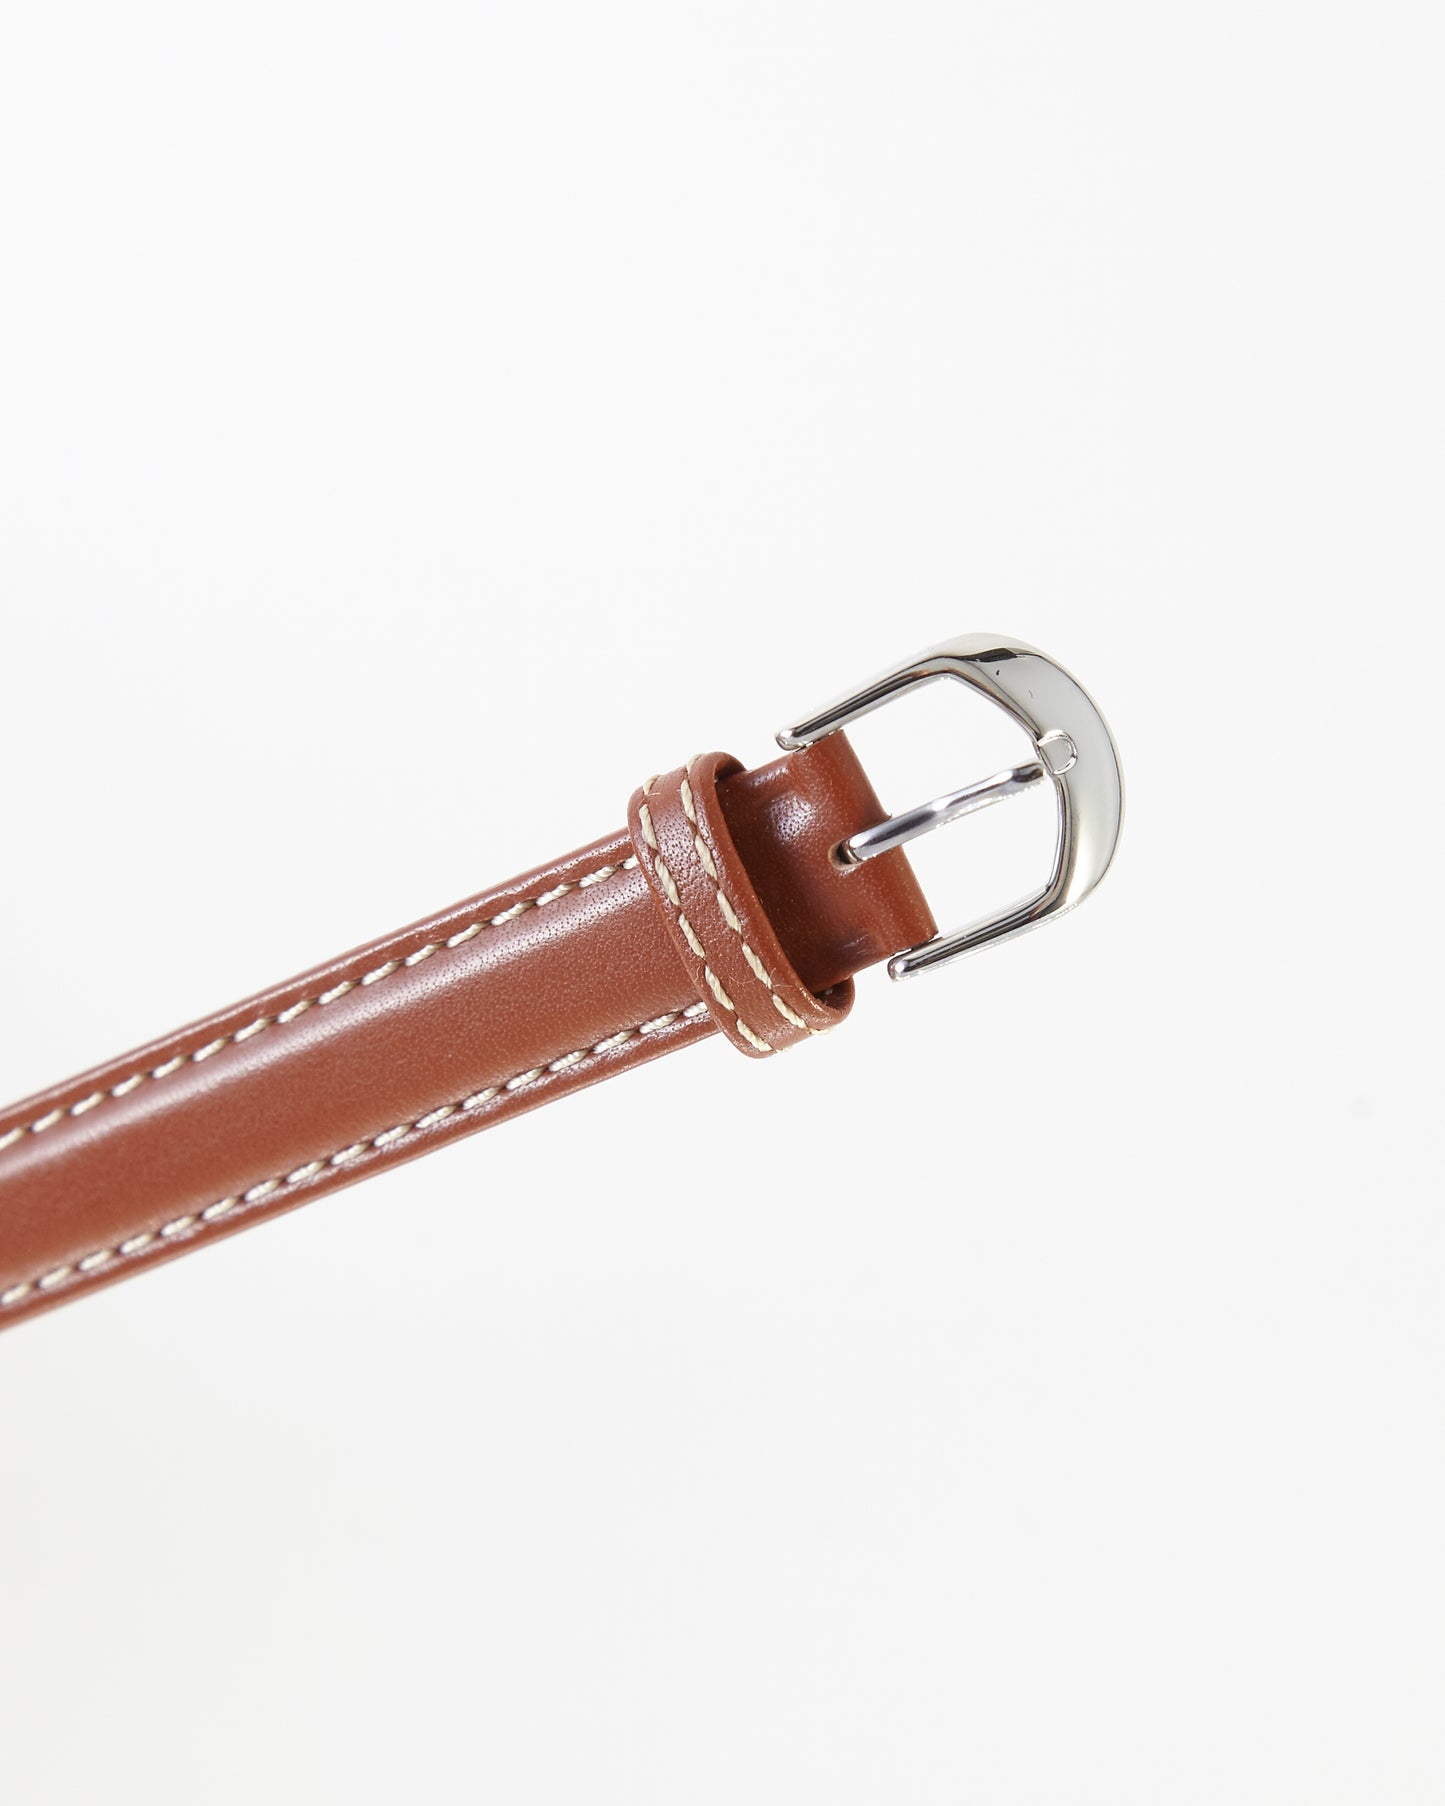 Ecclissi 15230 Brown Leather One Piece Strap 14mm x 14mm